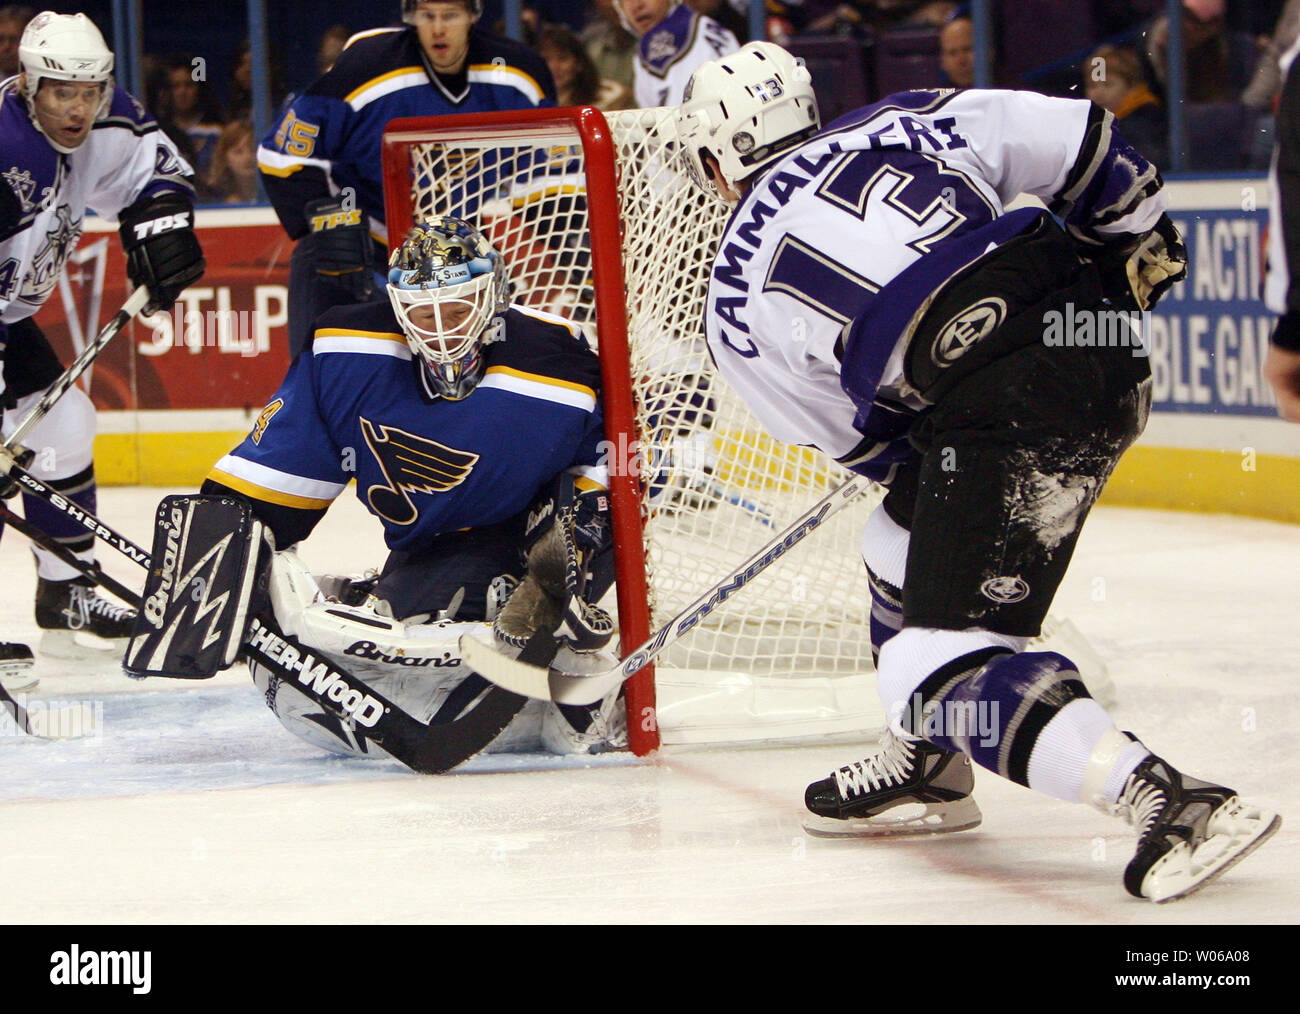 Los Angeles Kings Michael Cammalleri (13) sneaks the puck past St. Louis Blues goaltender Manny Legace for a goal in the first period at the Scottrade Center in St. Louis on January 13, 2007. (UPI Photo/Bill Greenblatt) Stock Photo